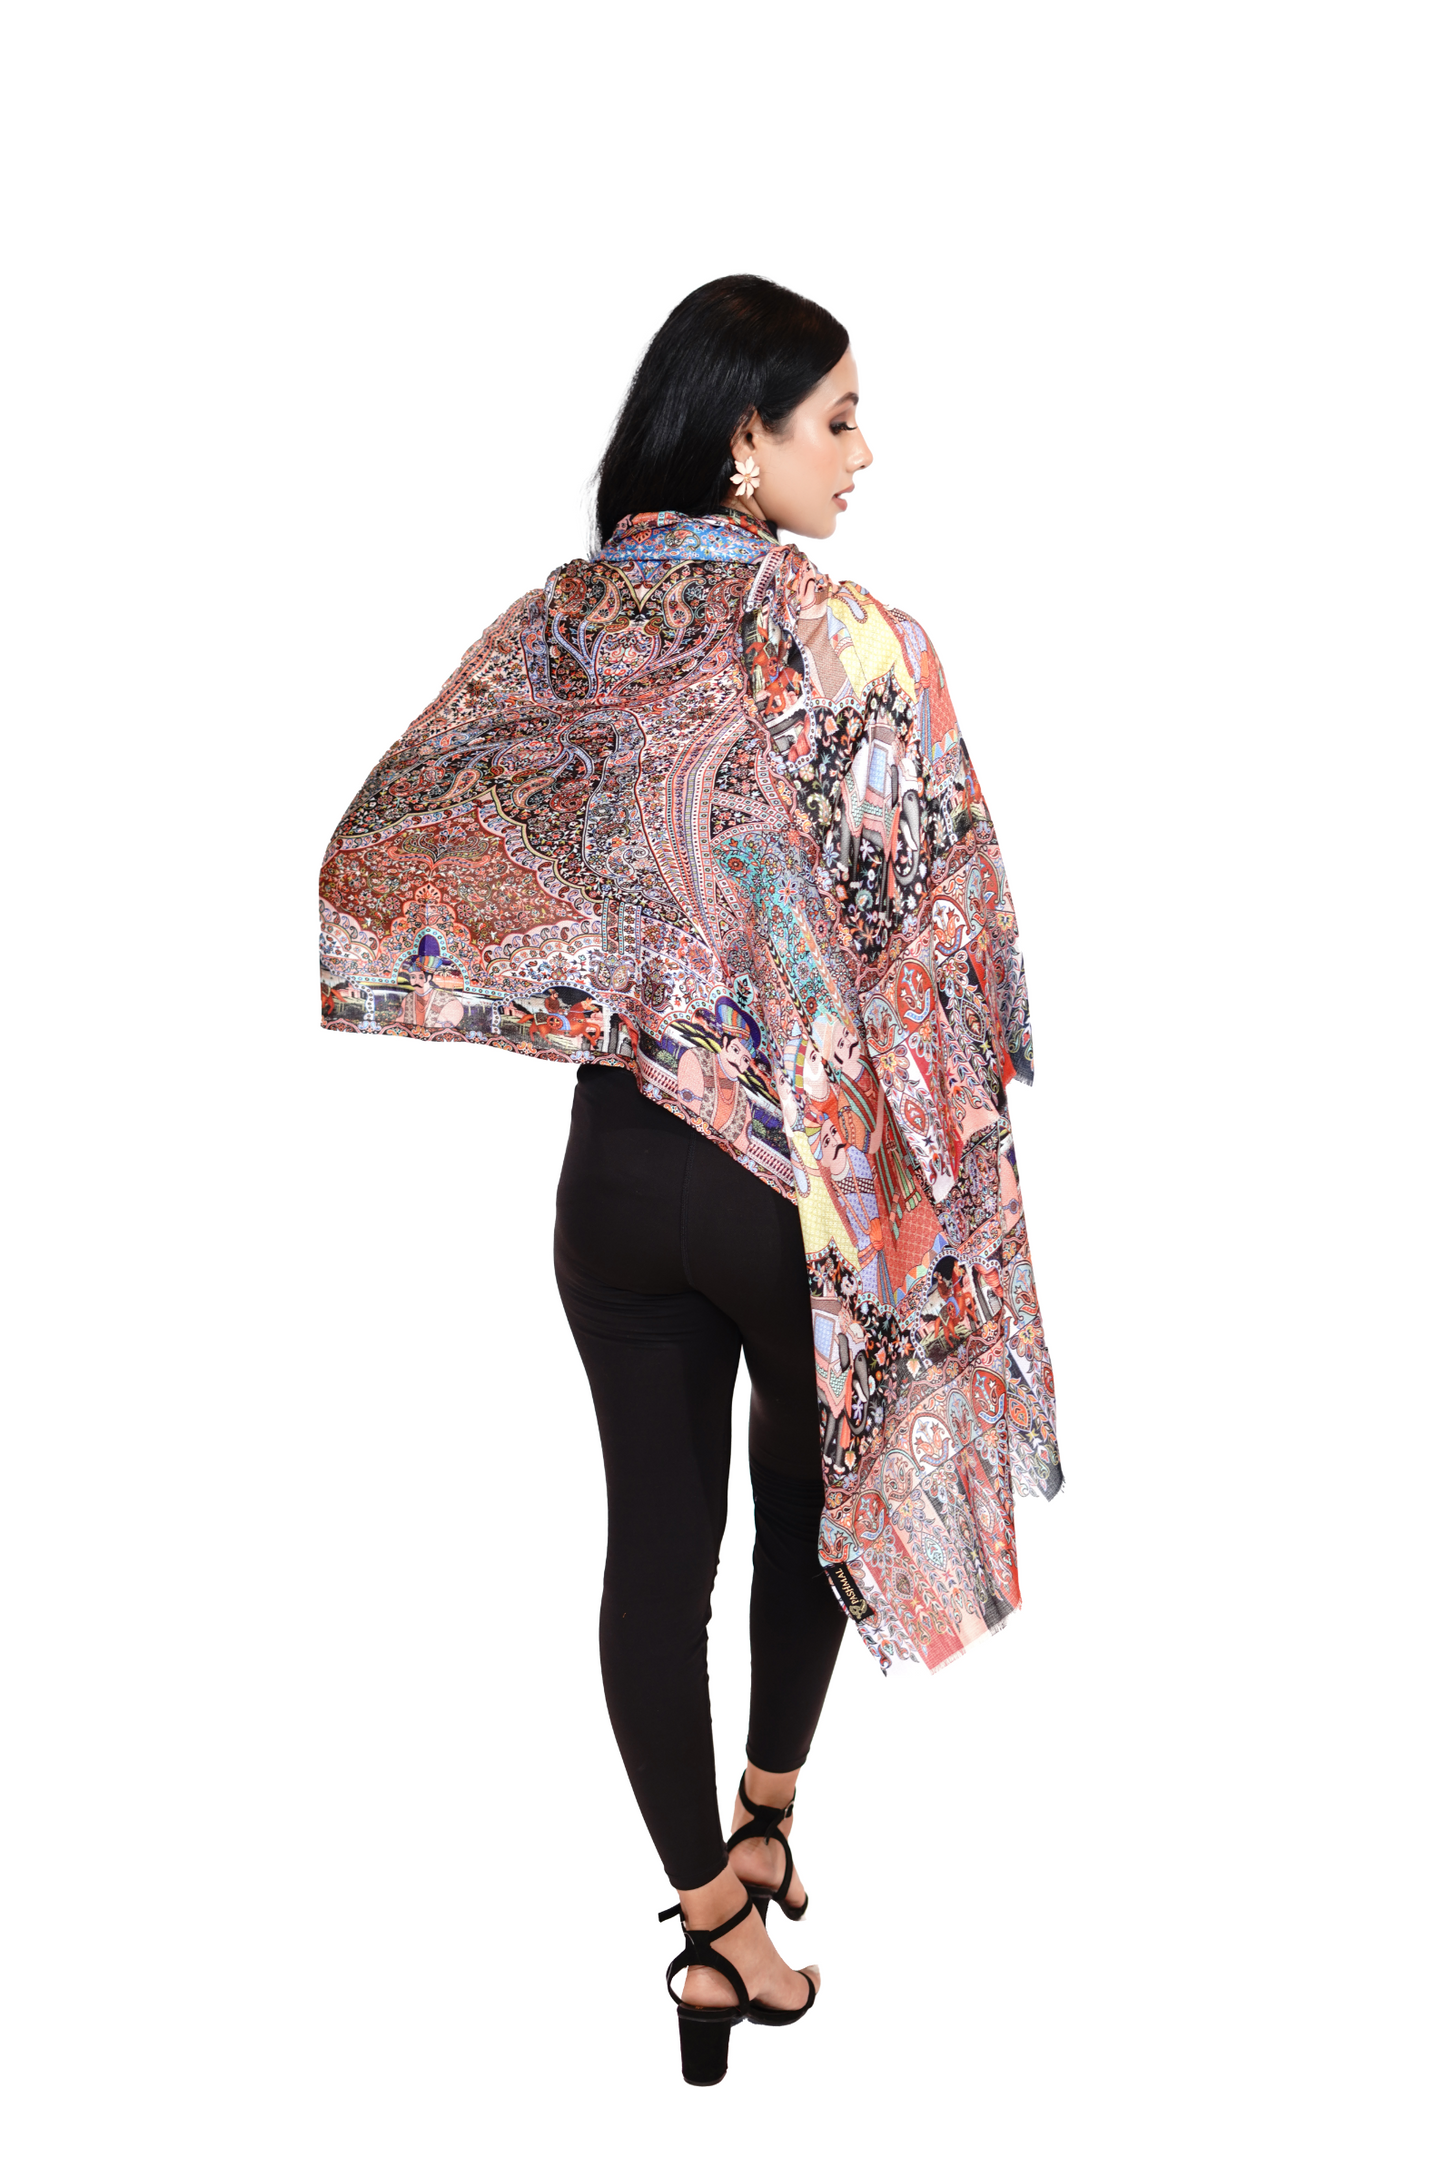 Soft Bamboo Modal Printed Stole for Women - Vintage